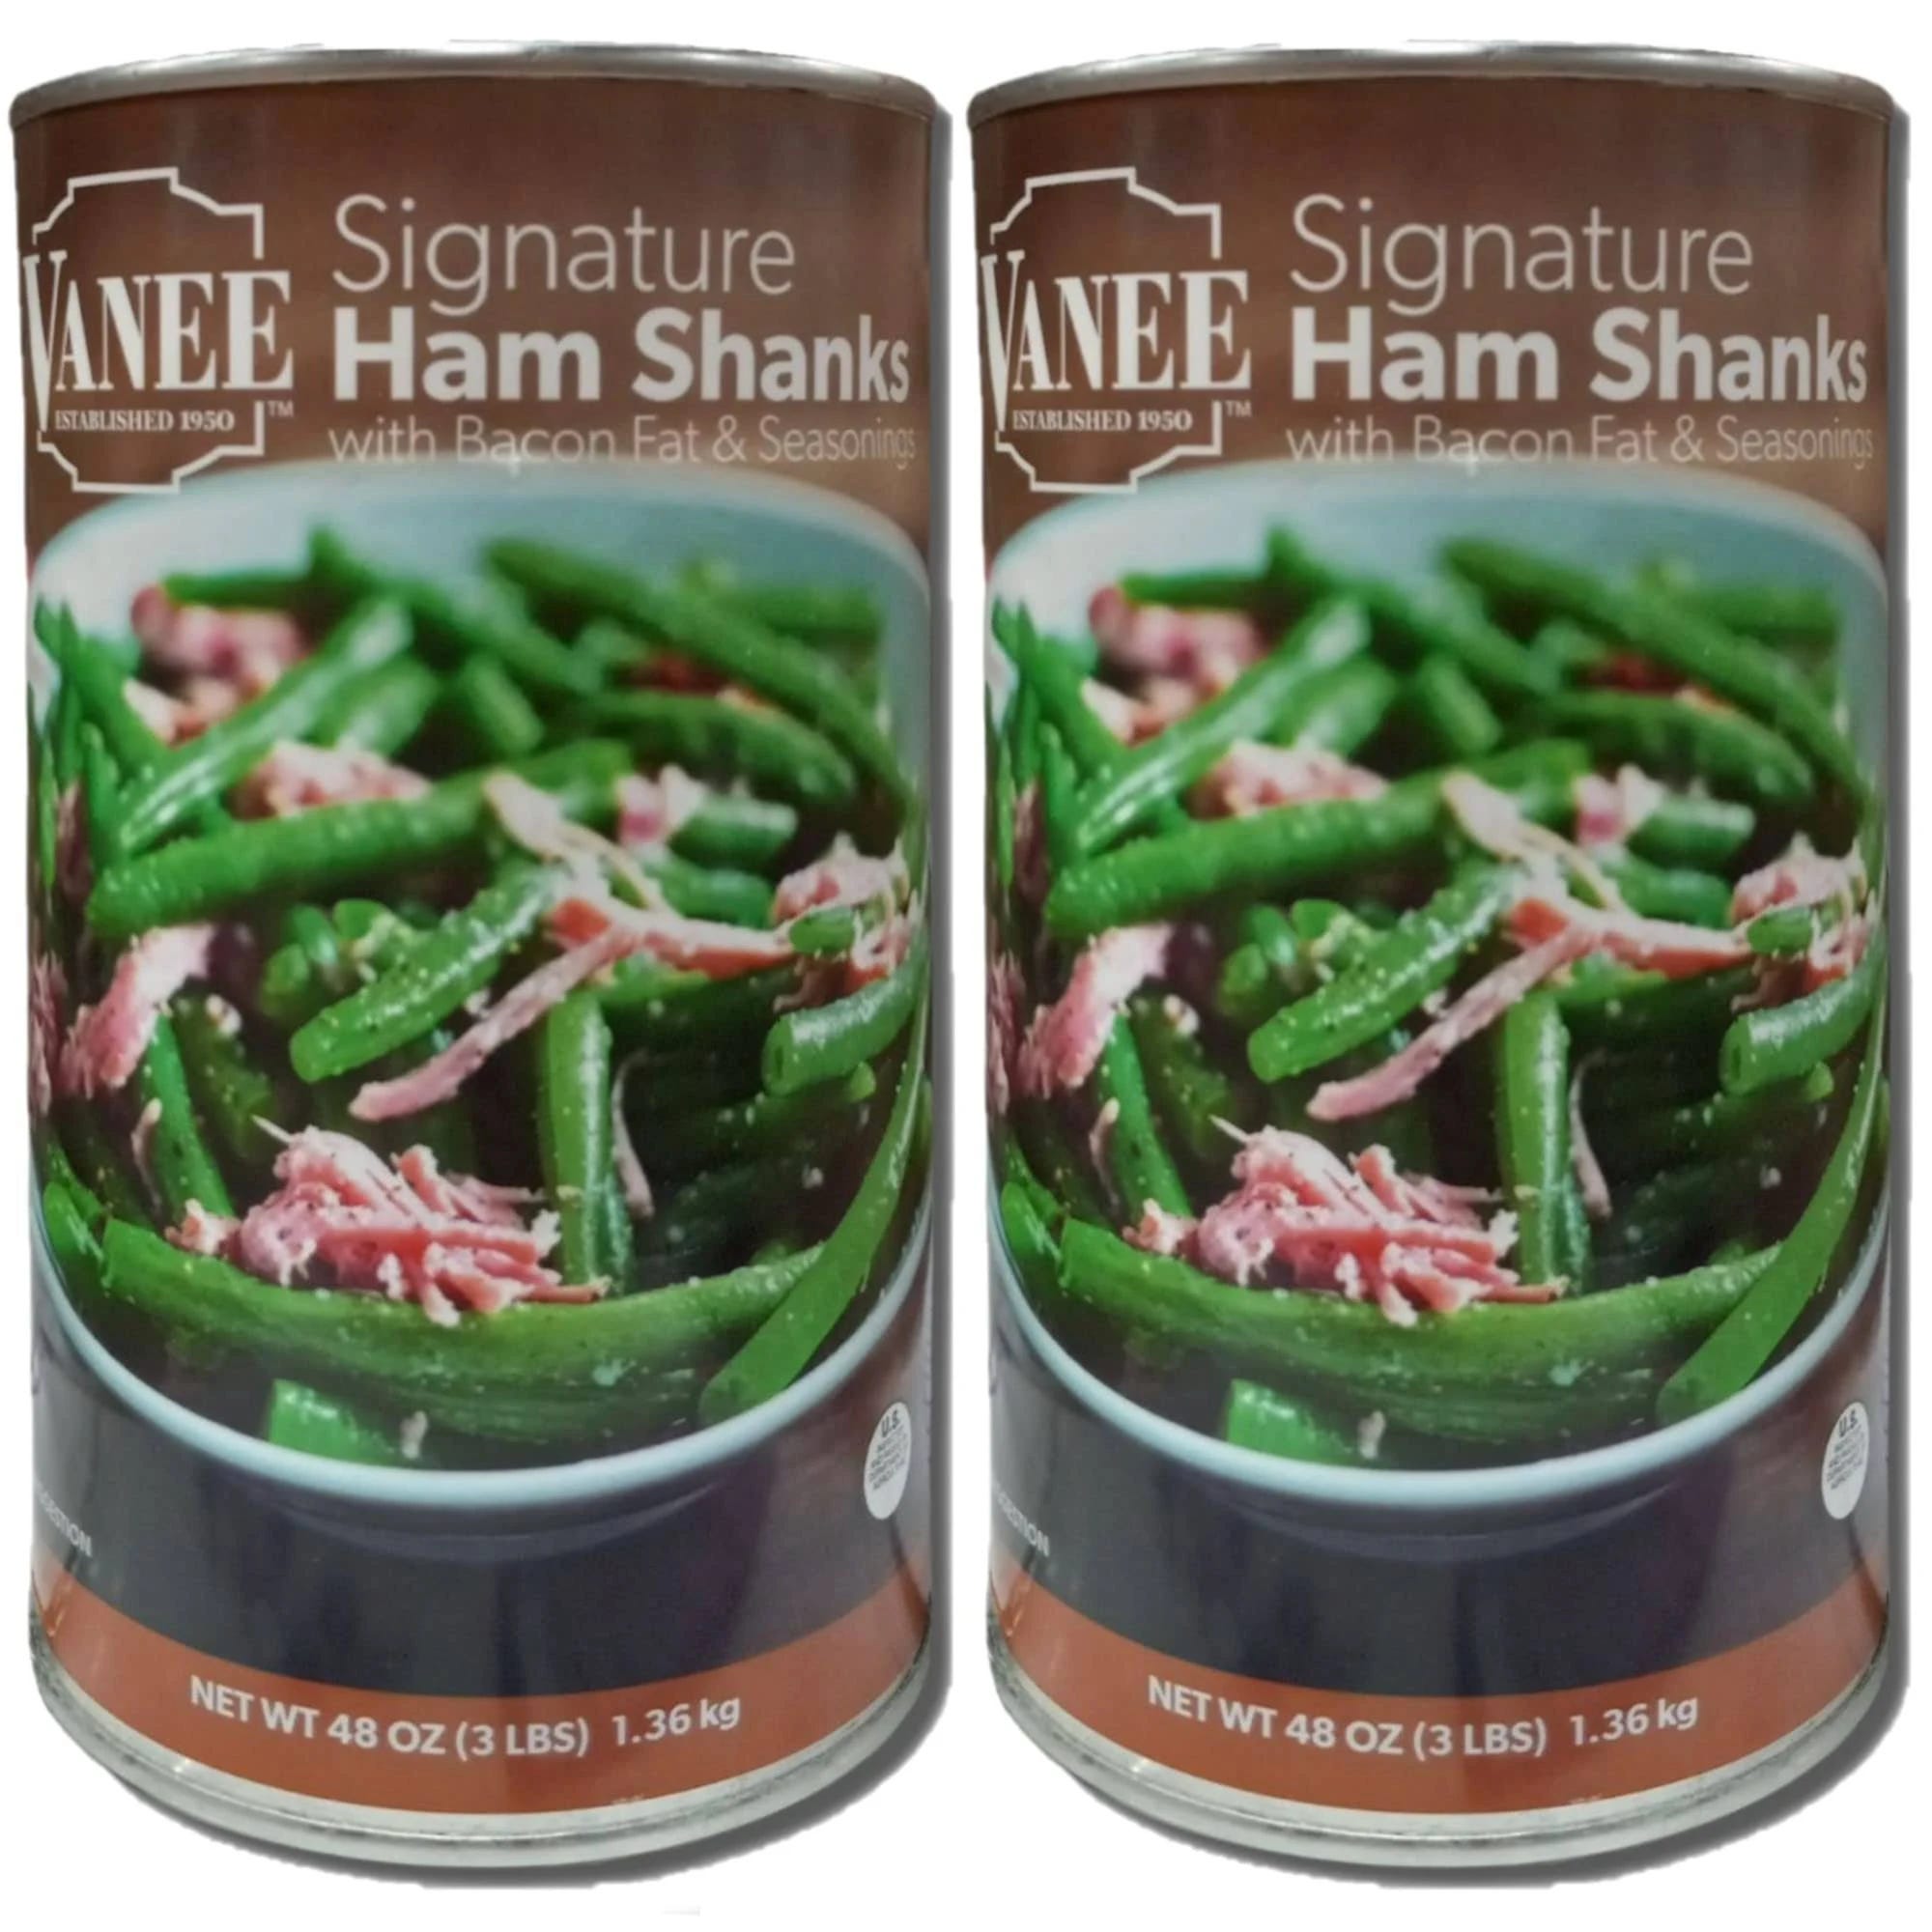 Premium Canned Ham with Bacon Fat and Seasonings - Value Pack of 2 | Image